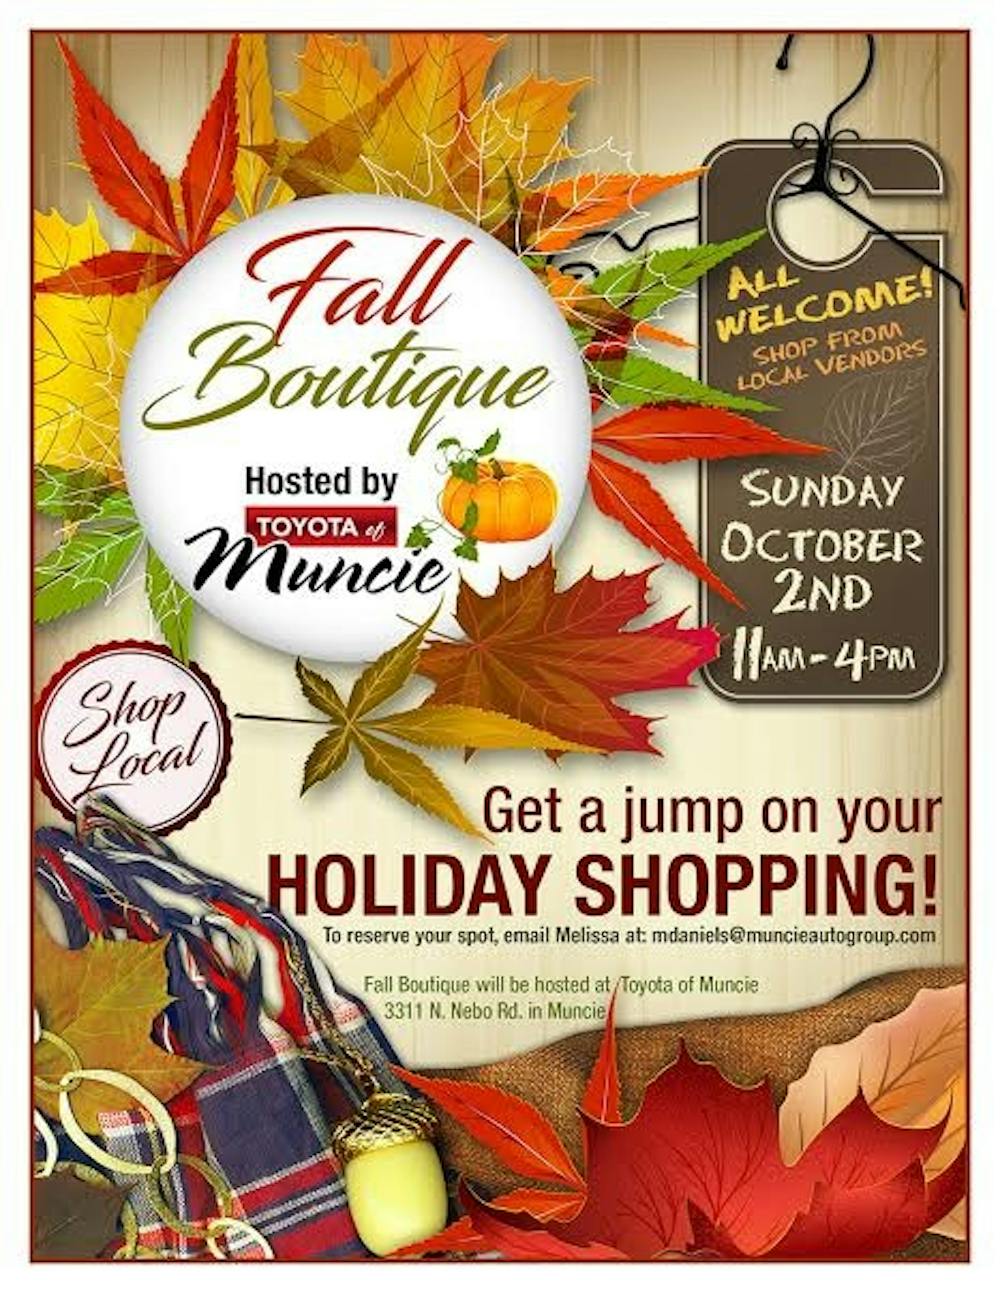 <p>On Oct. 2, Toyota of Muncie will open its floor space to host a free Fall Boutique from 11 a.m. to 4 p.m. Attendees will receive a small gift and the chance to enter a drawing for a Starbucks gift package or an autographed Robert Mathis item. <em>Toyota of Muncie // Photo Courtesy</em></p>